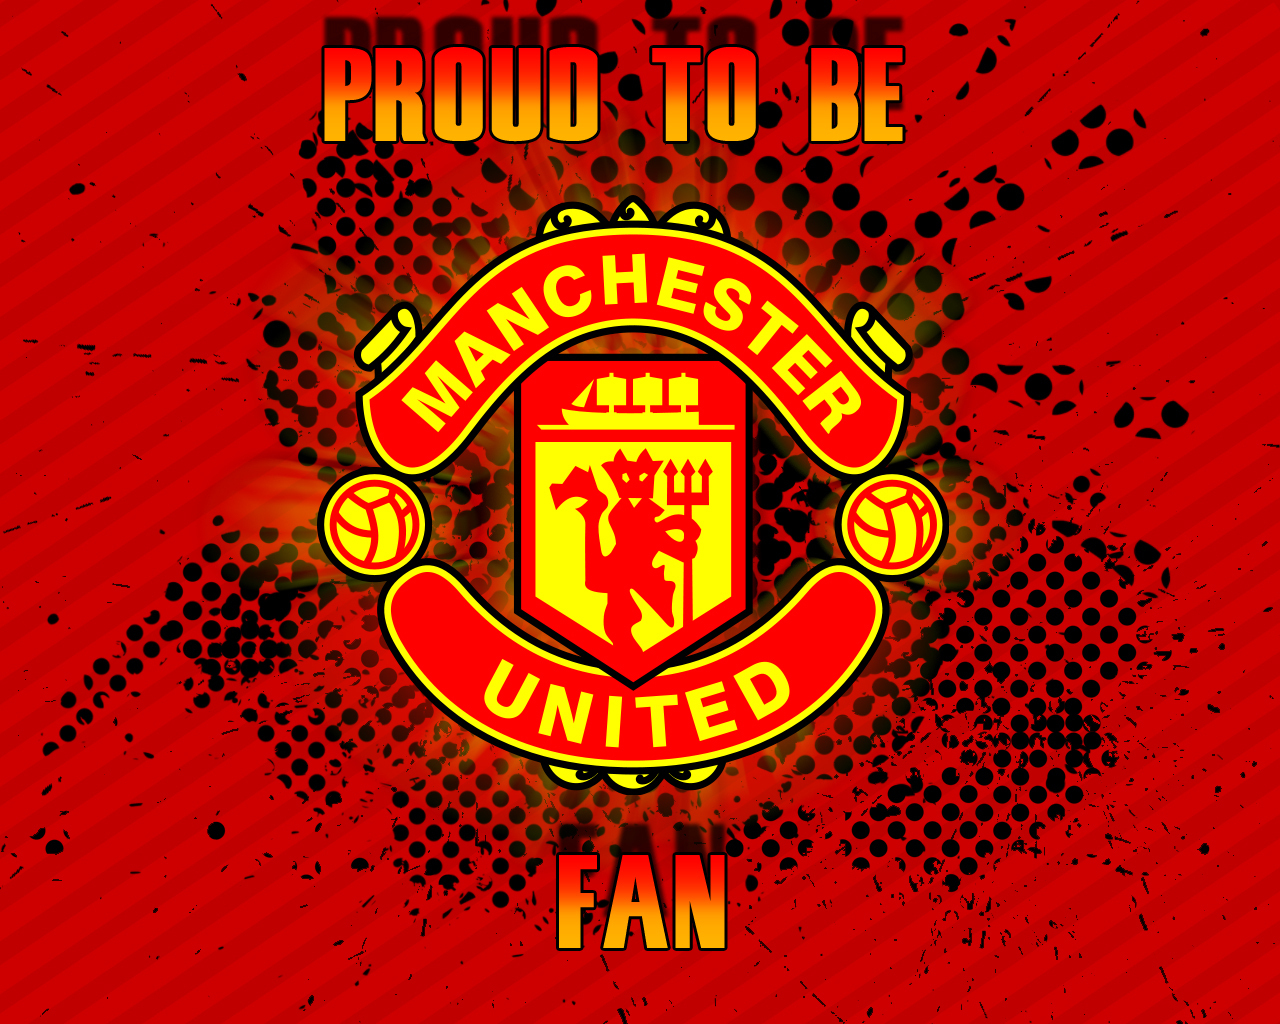 Wallpaper Manchester United - Best Wallpapers, Popular Images, Photos ...